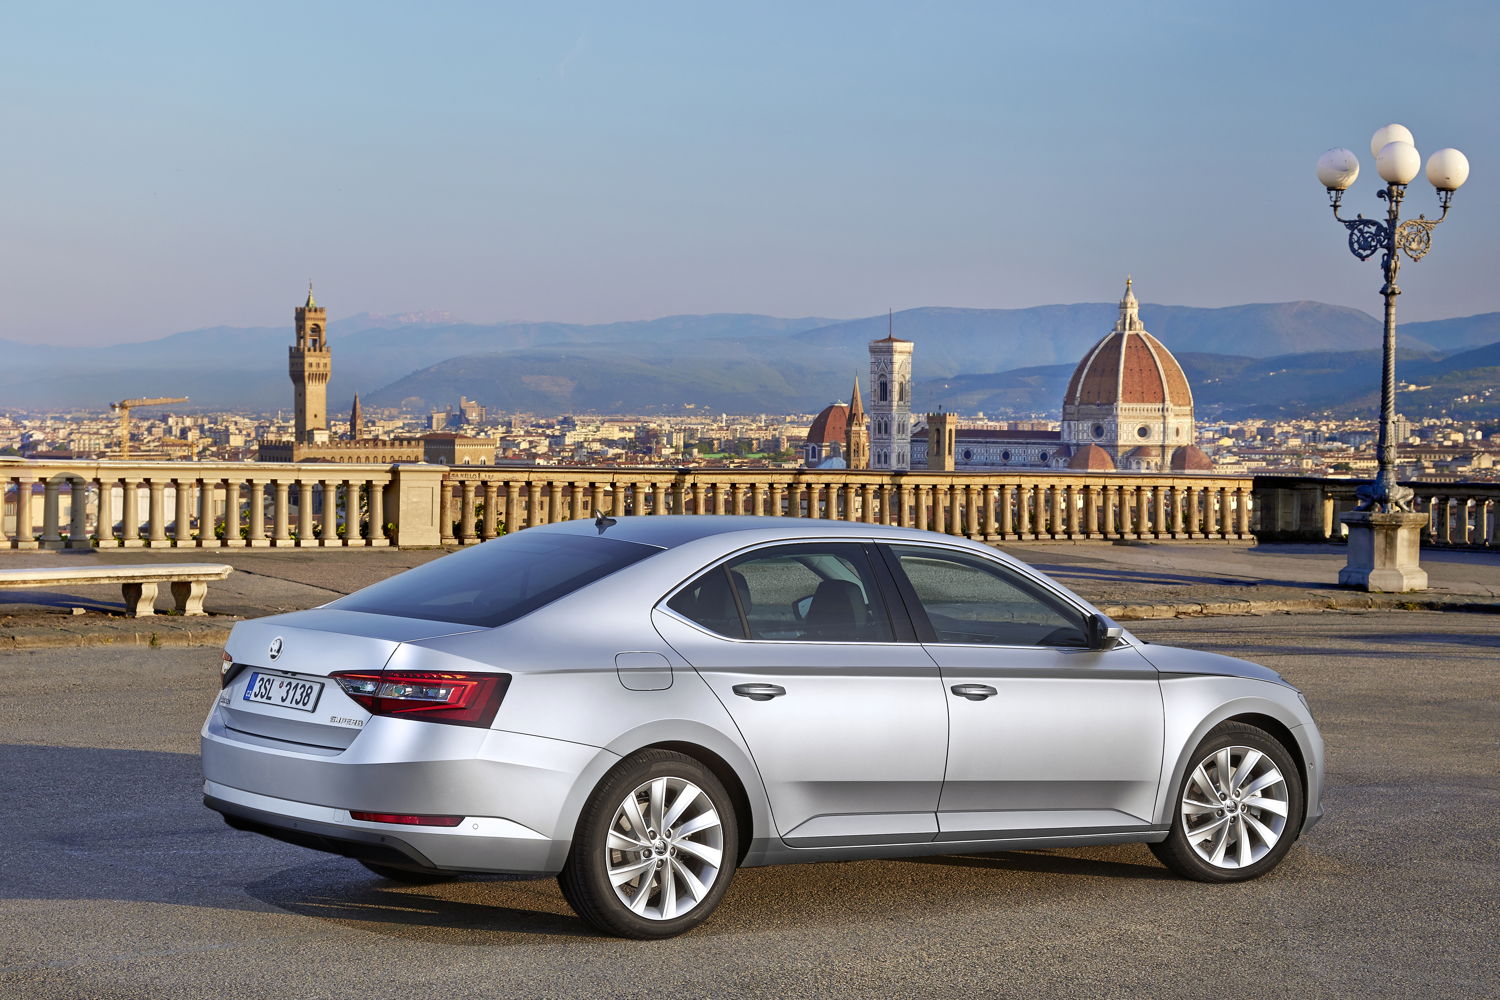 ŠKODA is highlighting its path to growth with the best first quarter in the company’s 122-year history. Never before has the traditional Czech brand achieved such strong results in sales revenue, deliveries and operating profit between January and March. The ŠKODA SUPERB (photo) made a significant contribution to the growth.